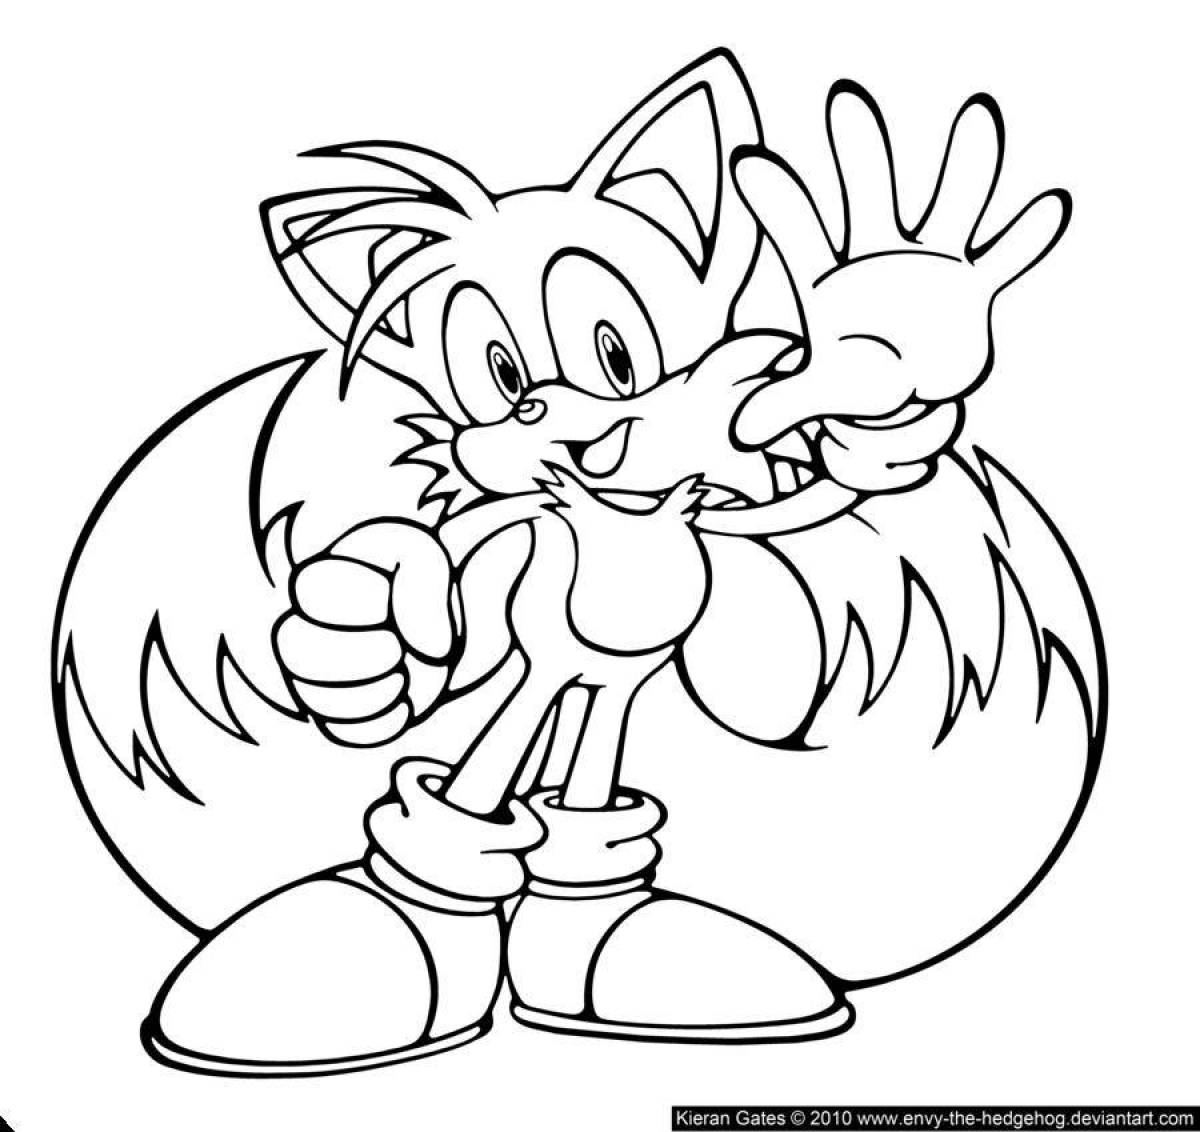 Grand sonic and tails coloring book